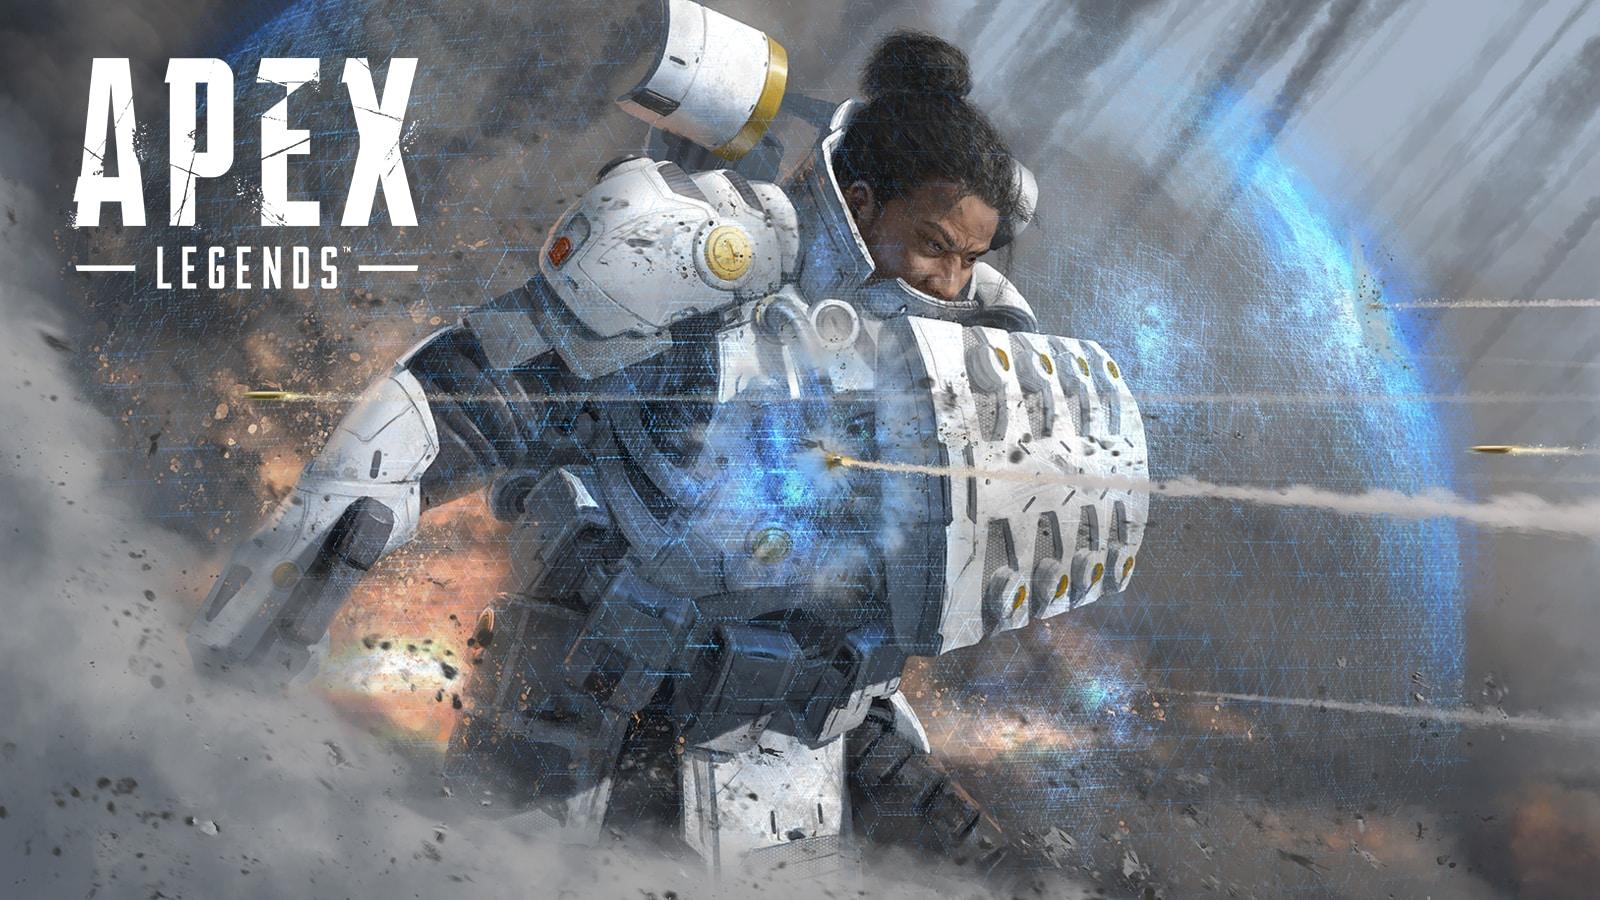 Respawn want Gibraltar to become "sexier pick" through Apex Legends bubble changes